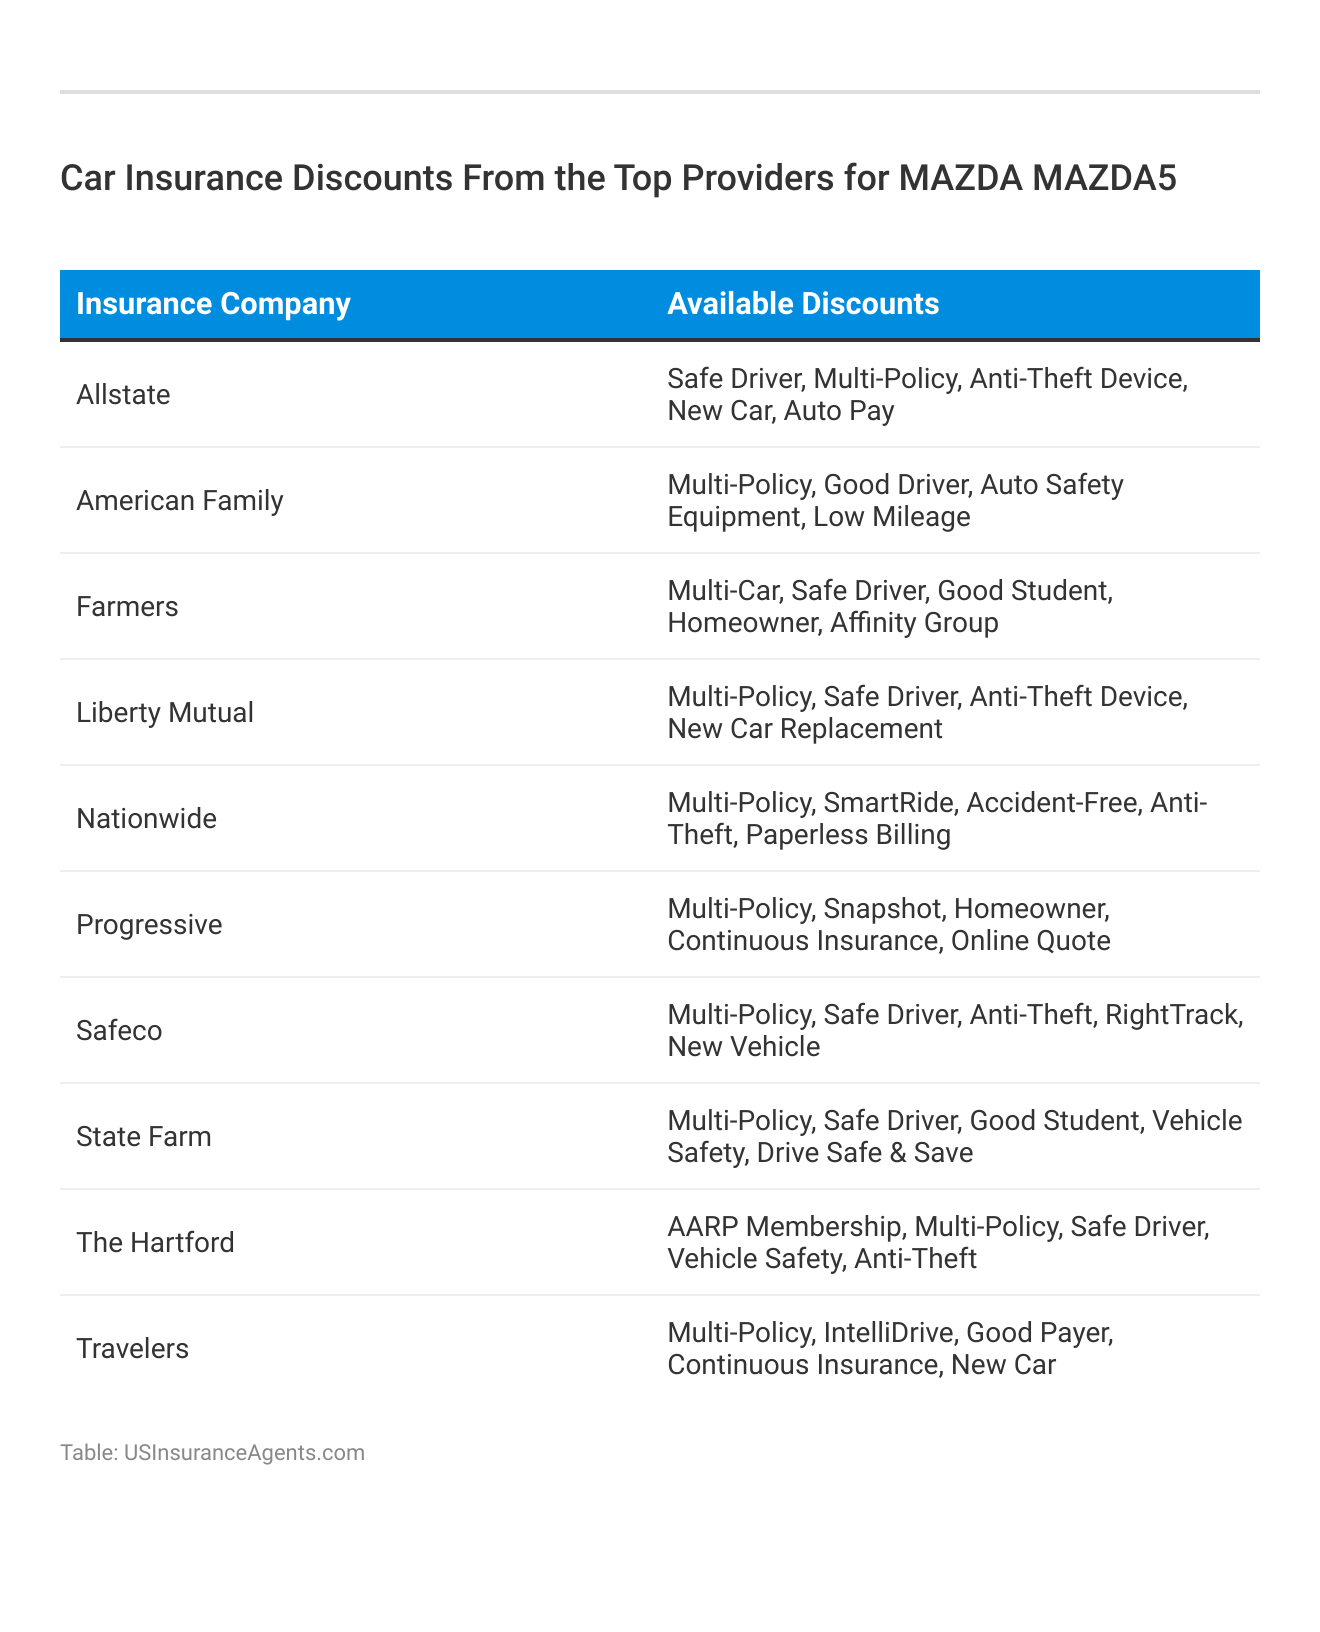 <h3>Car Insurance Discounts From the Top Providers for Mazda Mazda5</h3>